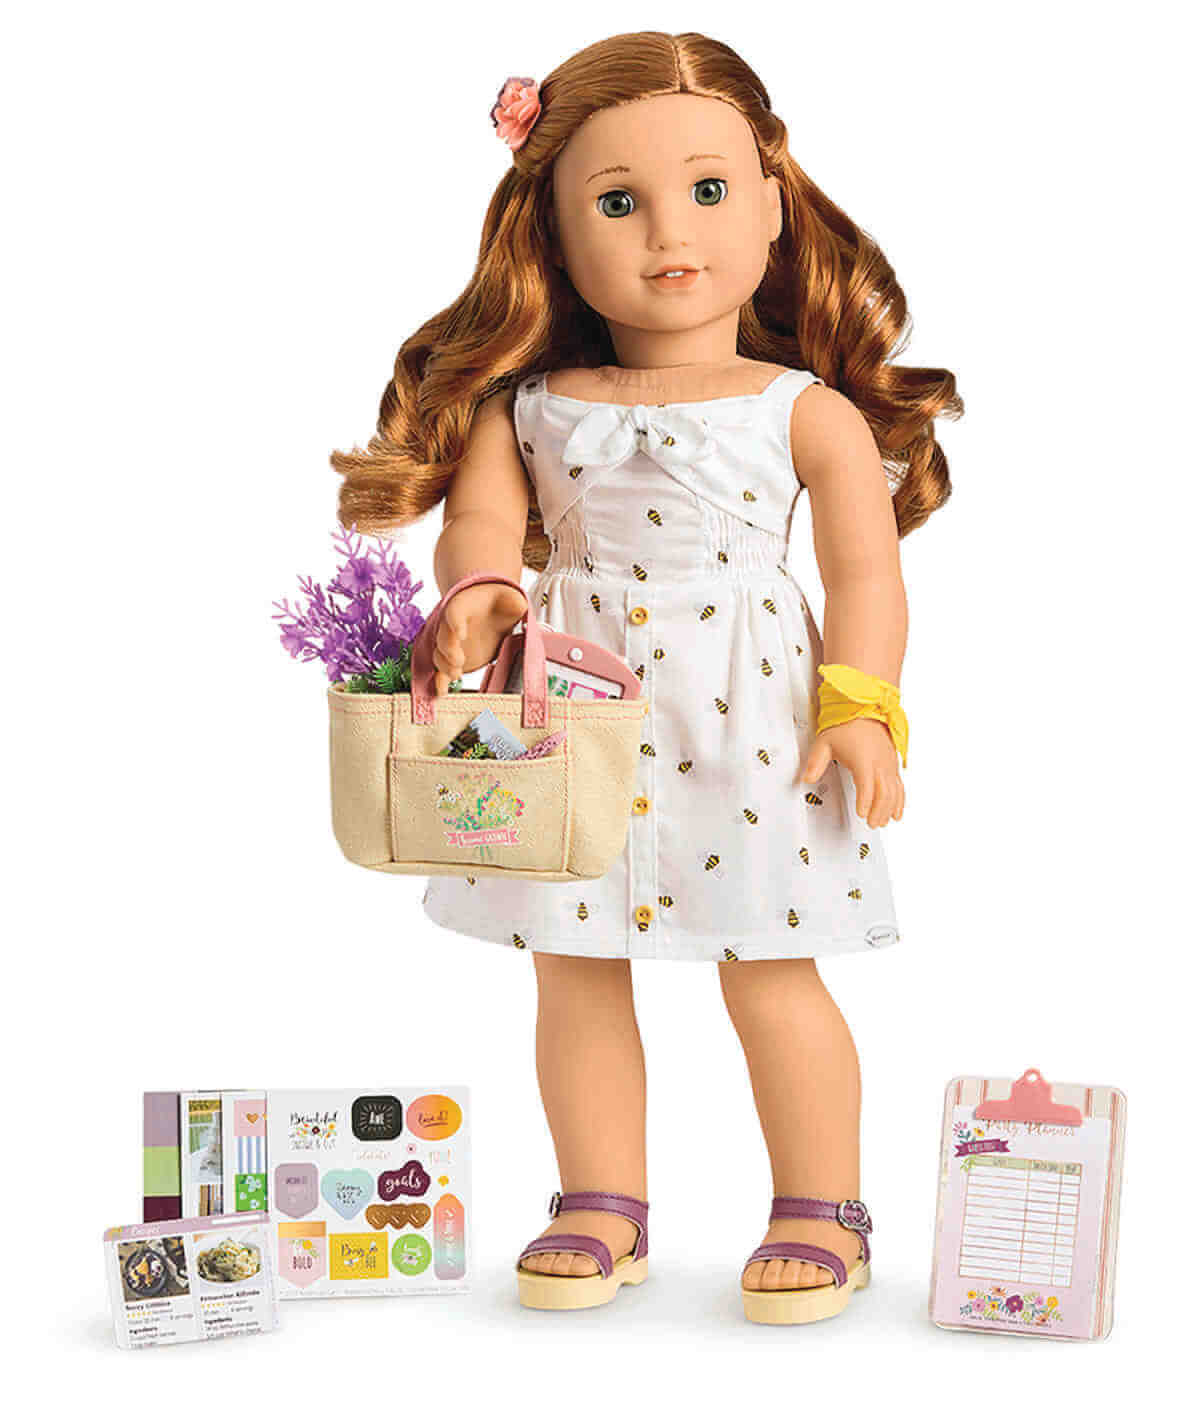 American Girl’s New Doll of 2019 Lives in the Hudson Valley!